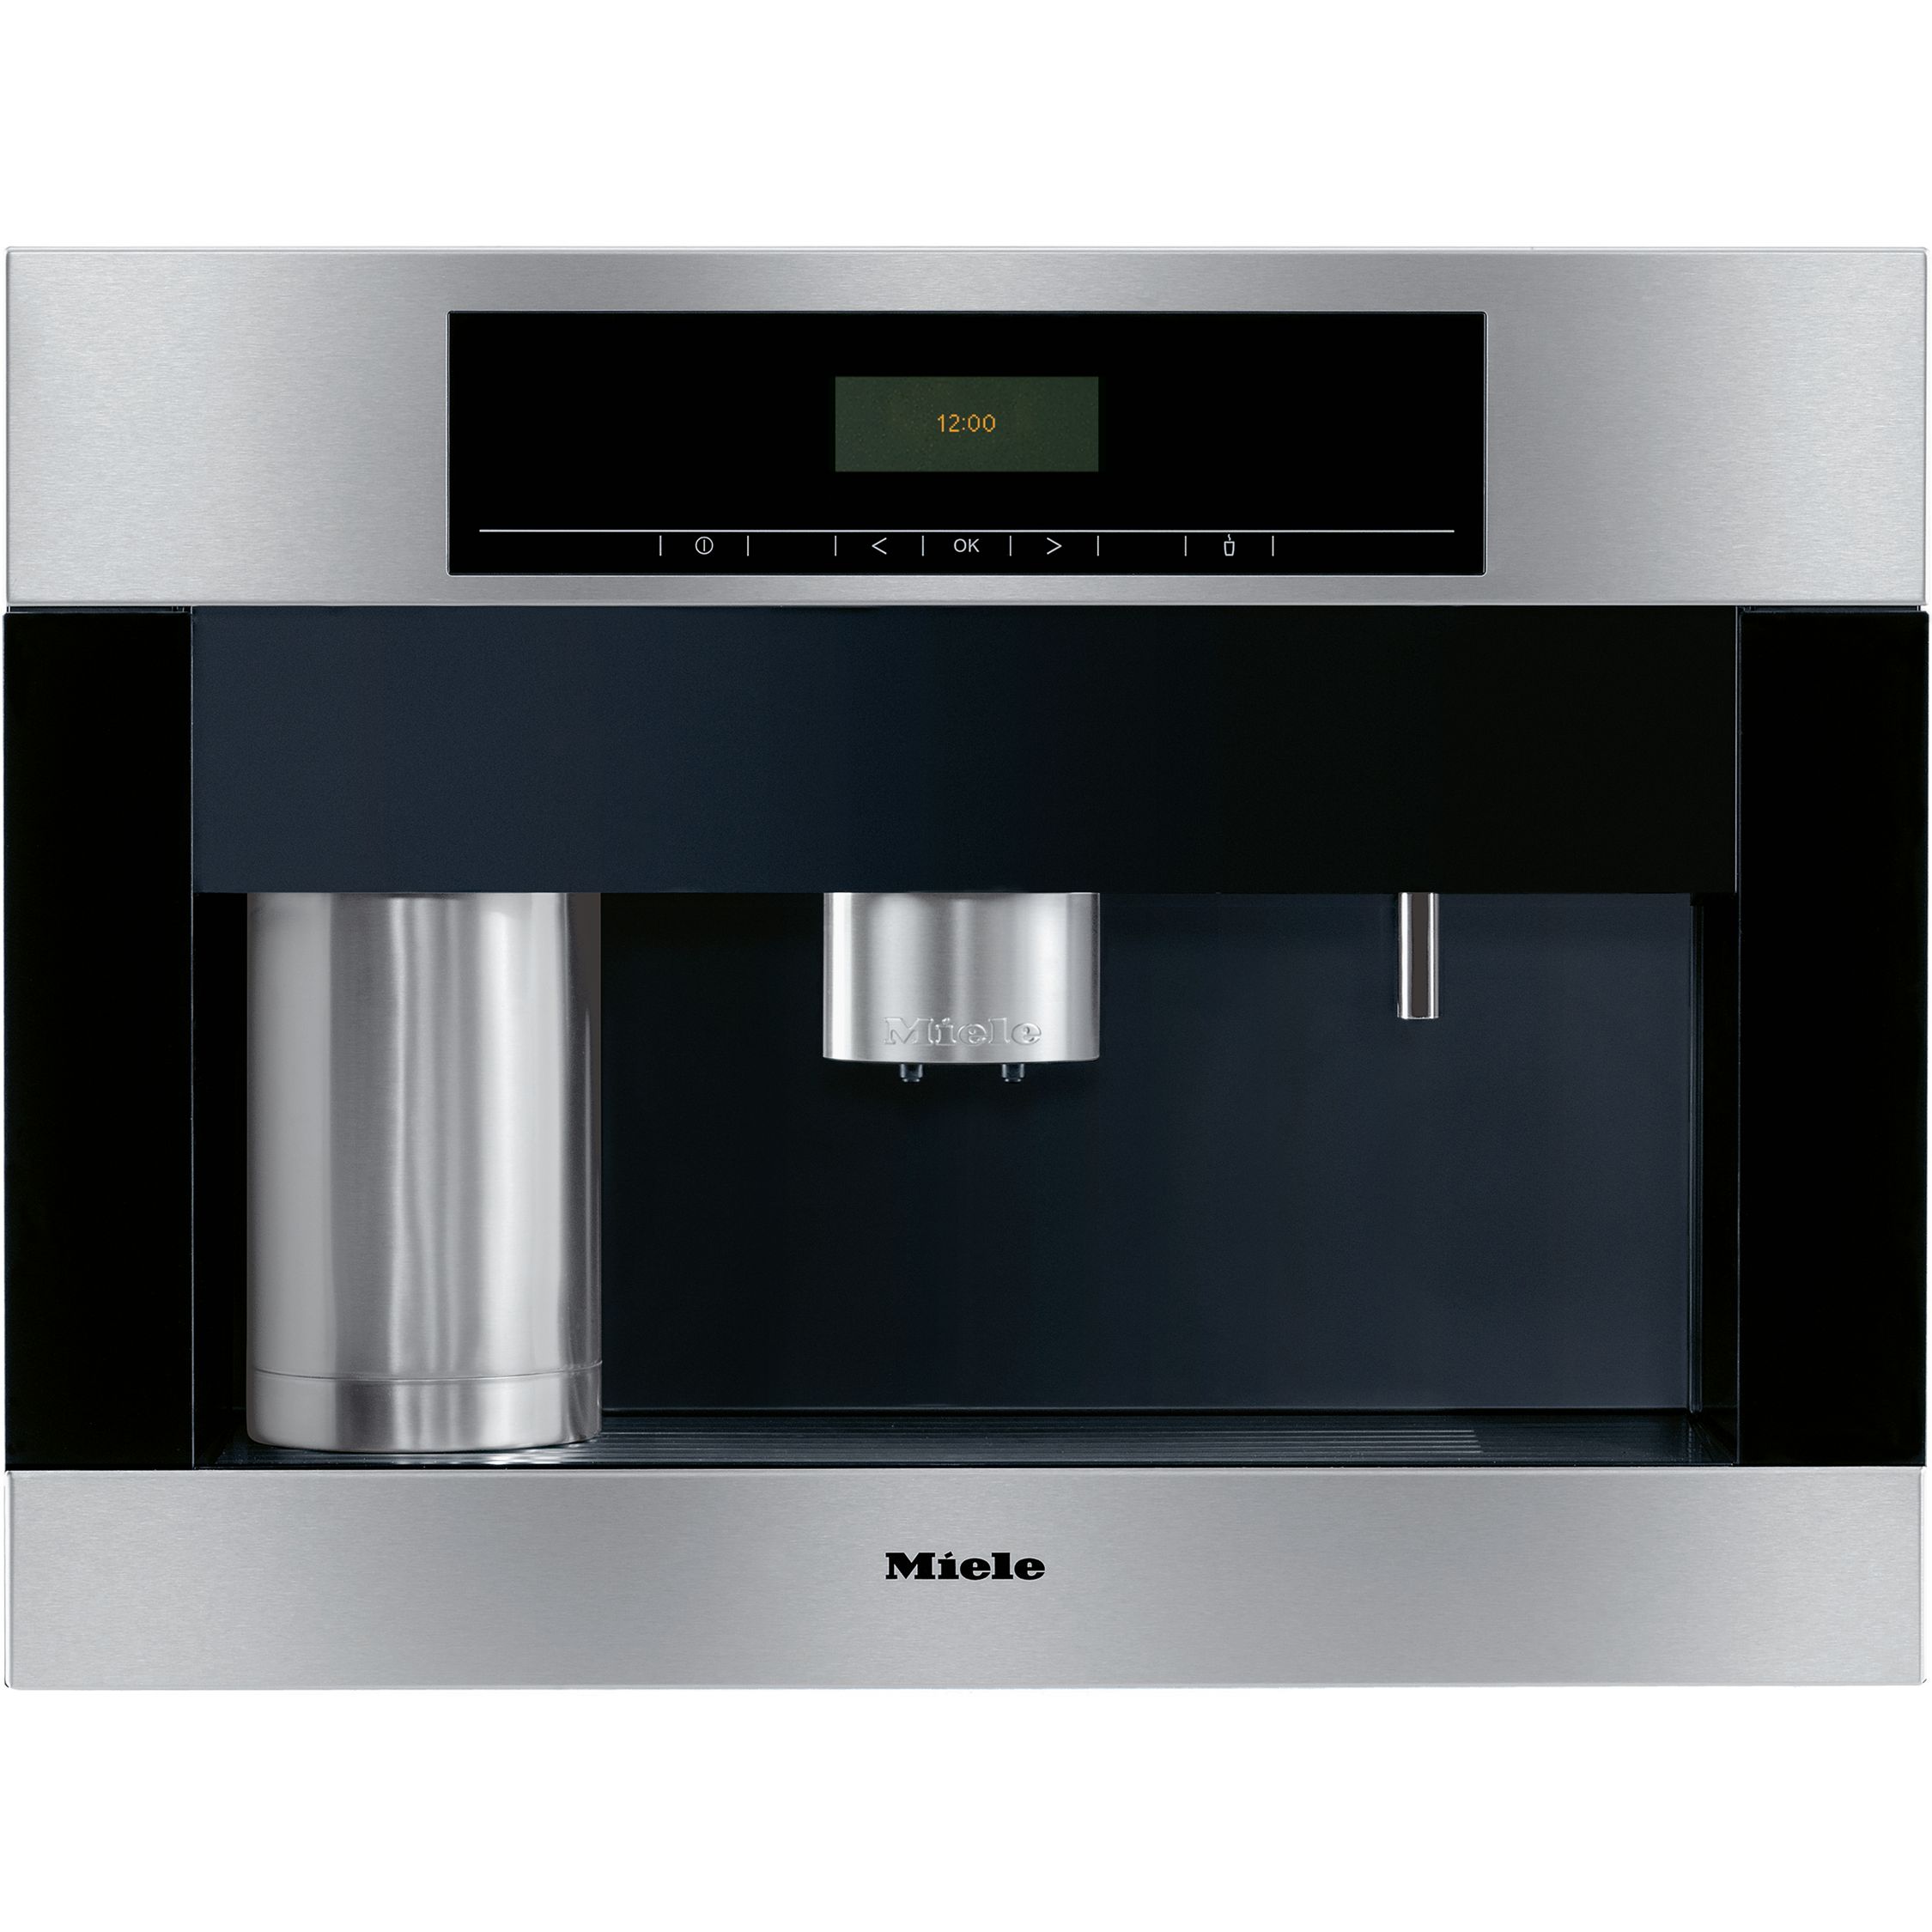 Miele CVA5060 Built-in Bean-to-Cup Coffee Machine, Stainless Steel